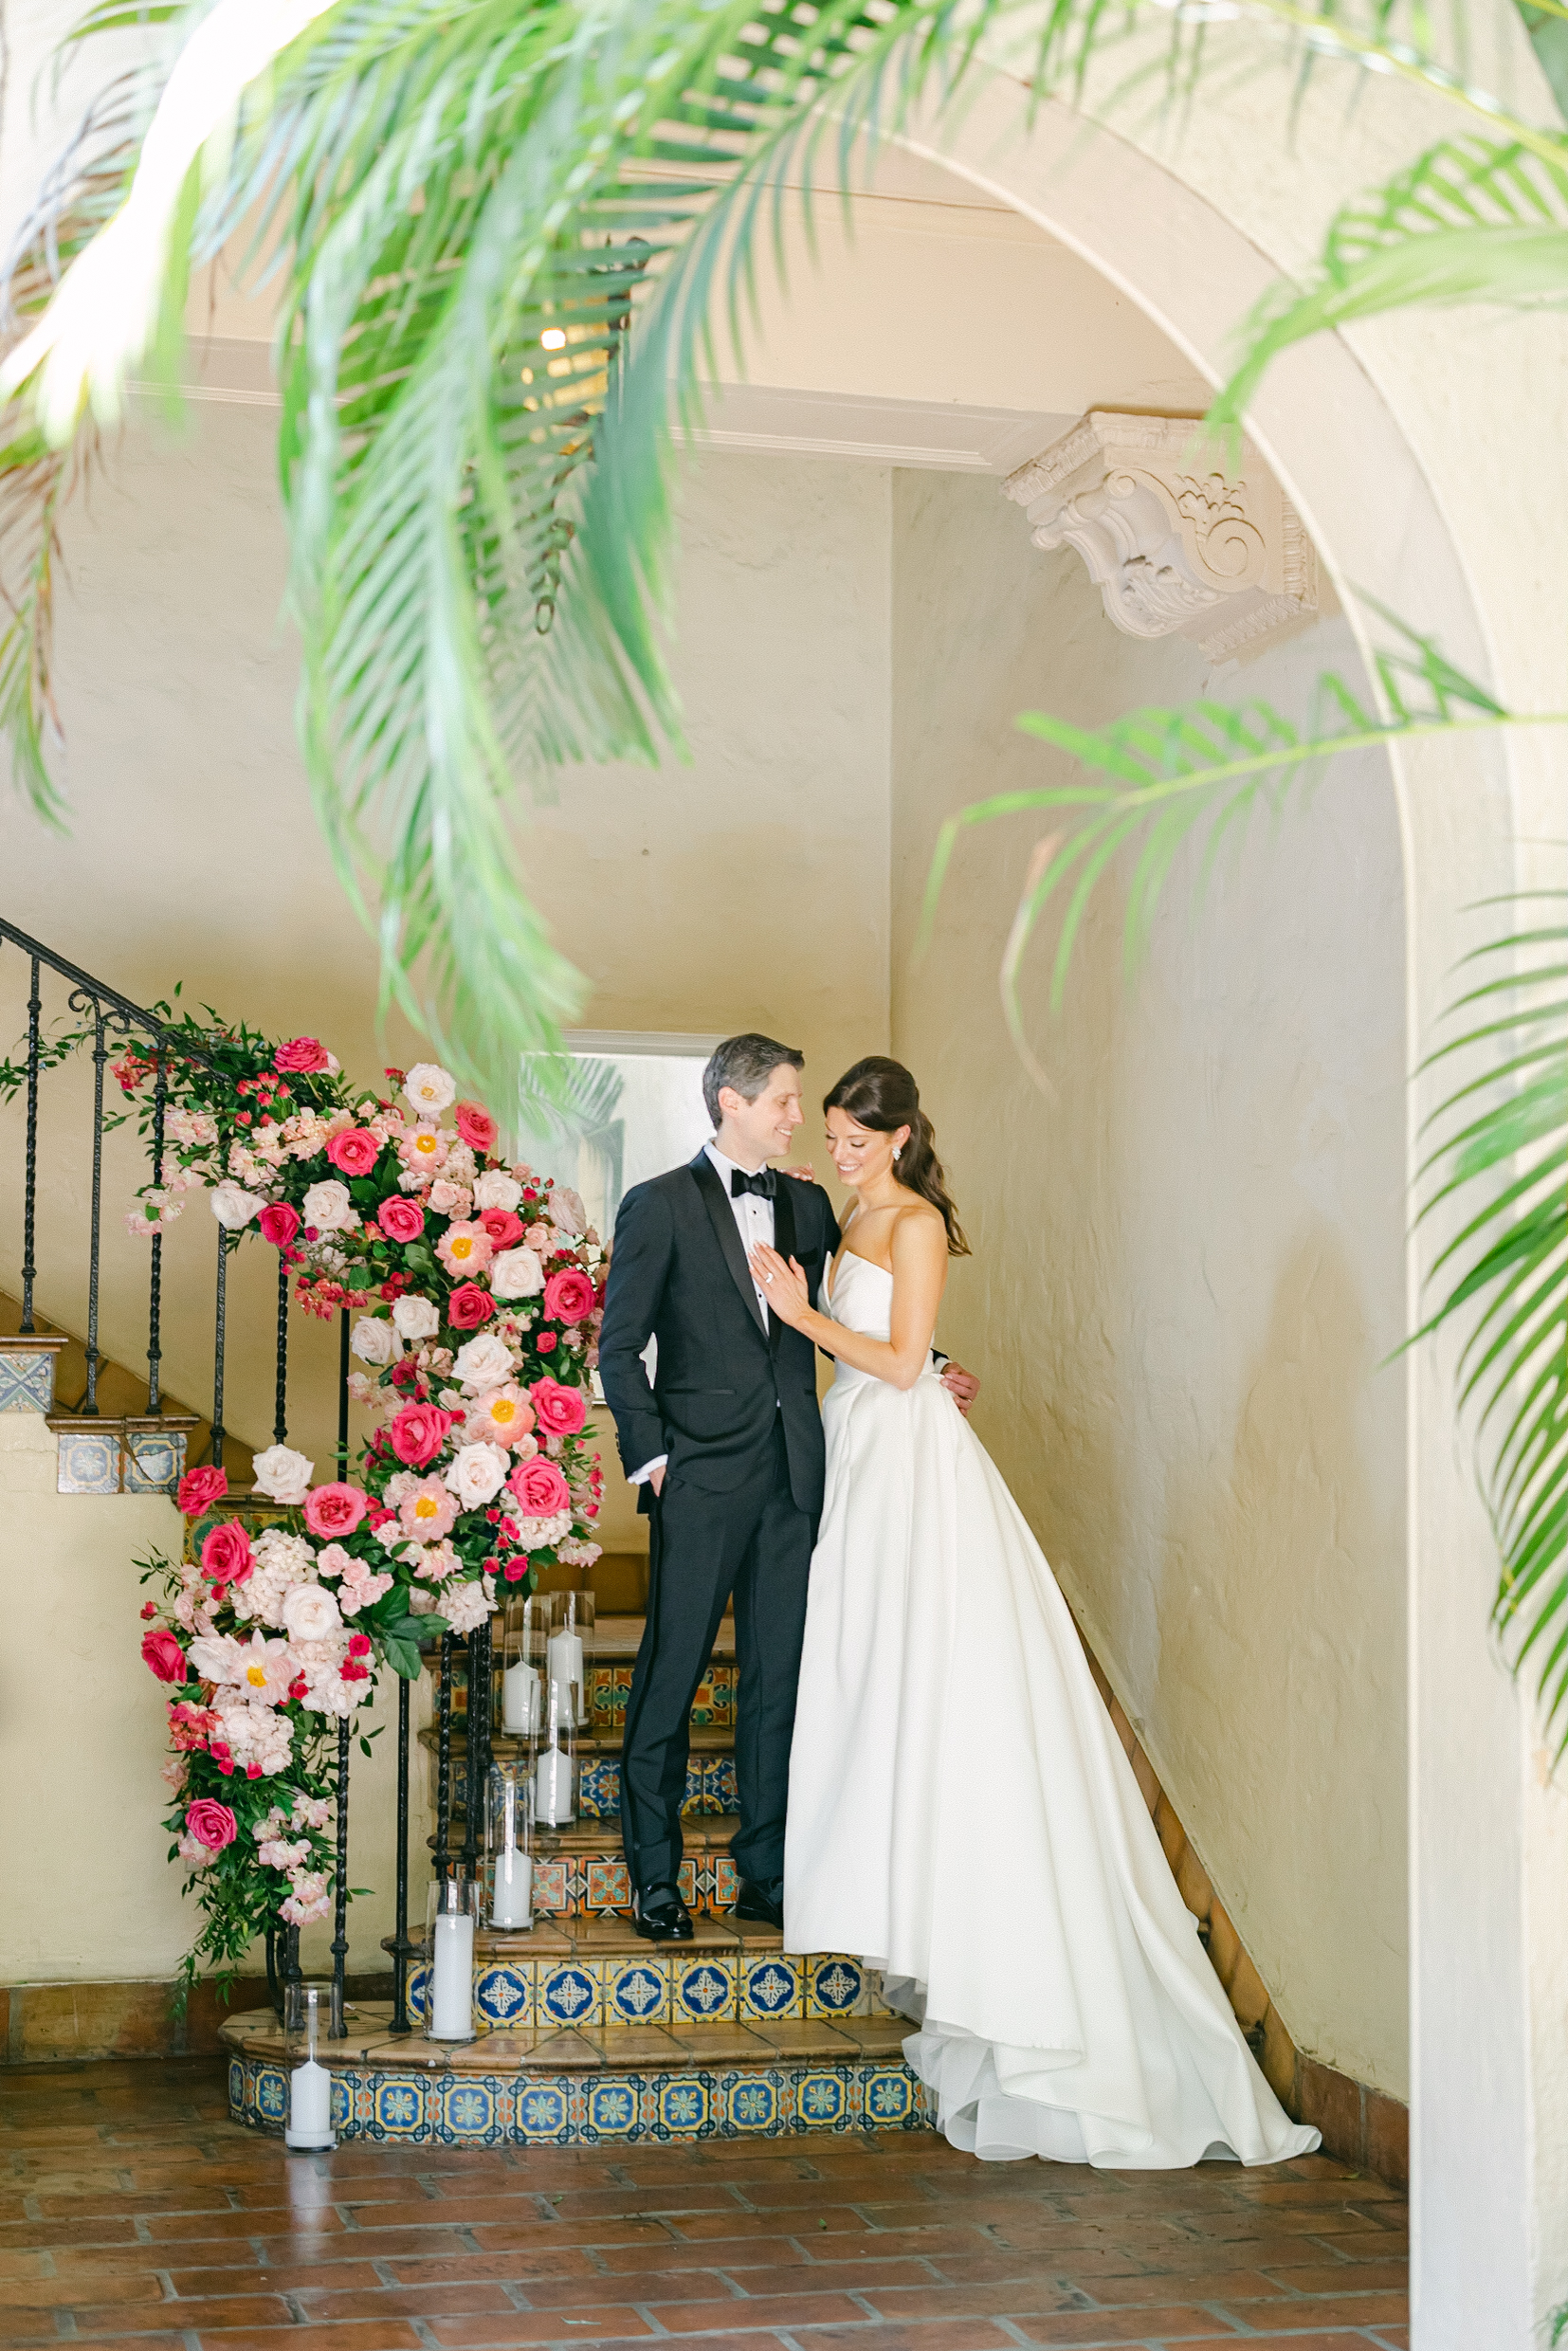 Bride and groom posing for an editorial portrait on a staircase. Staircase rail decorated in Barbie pink florals.